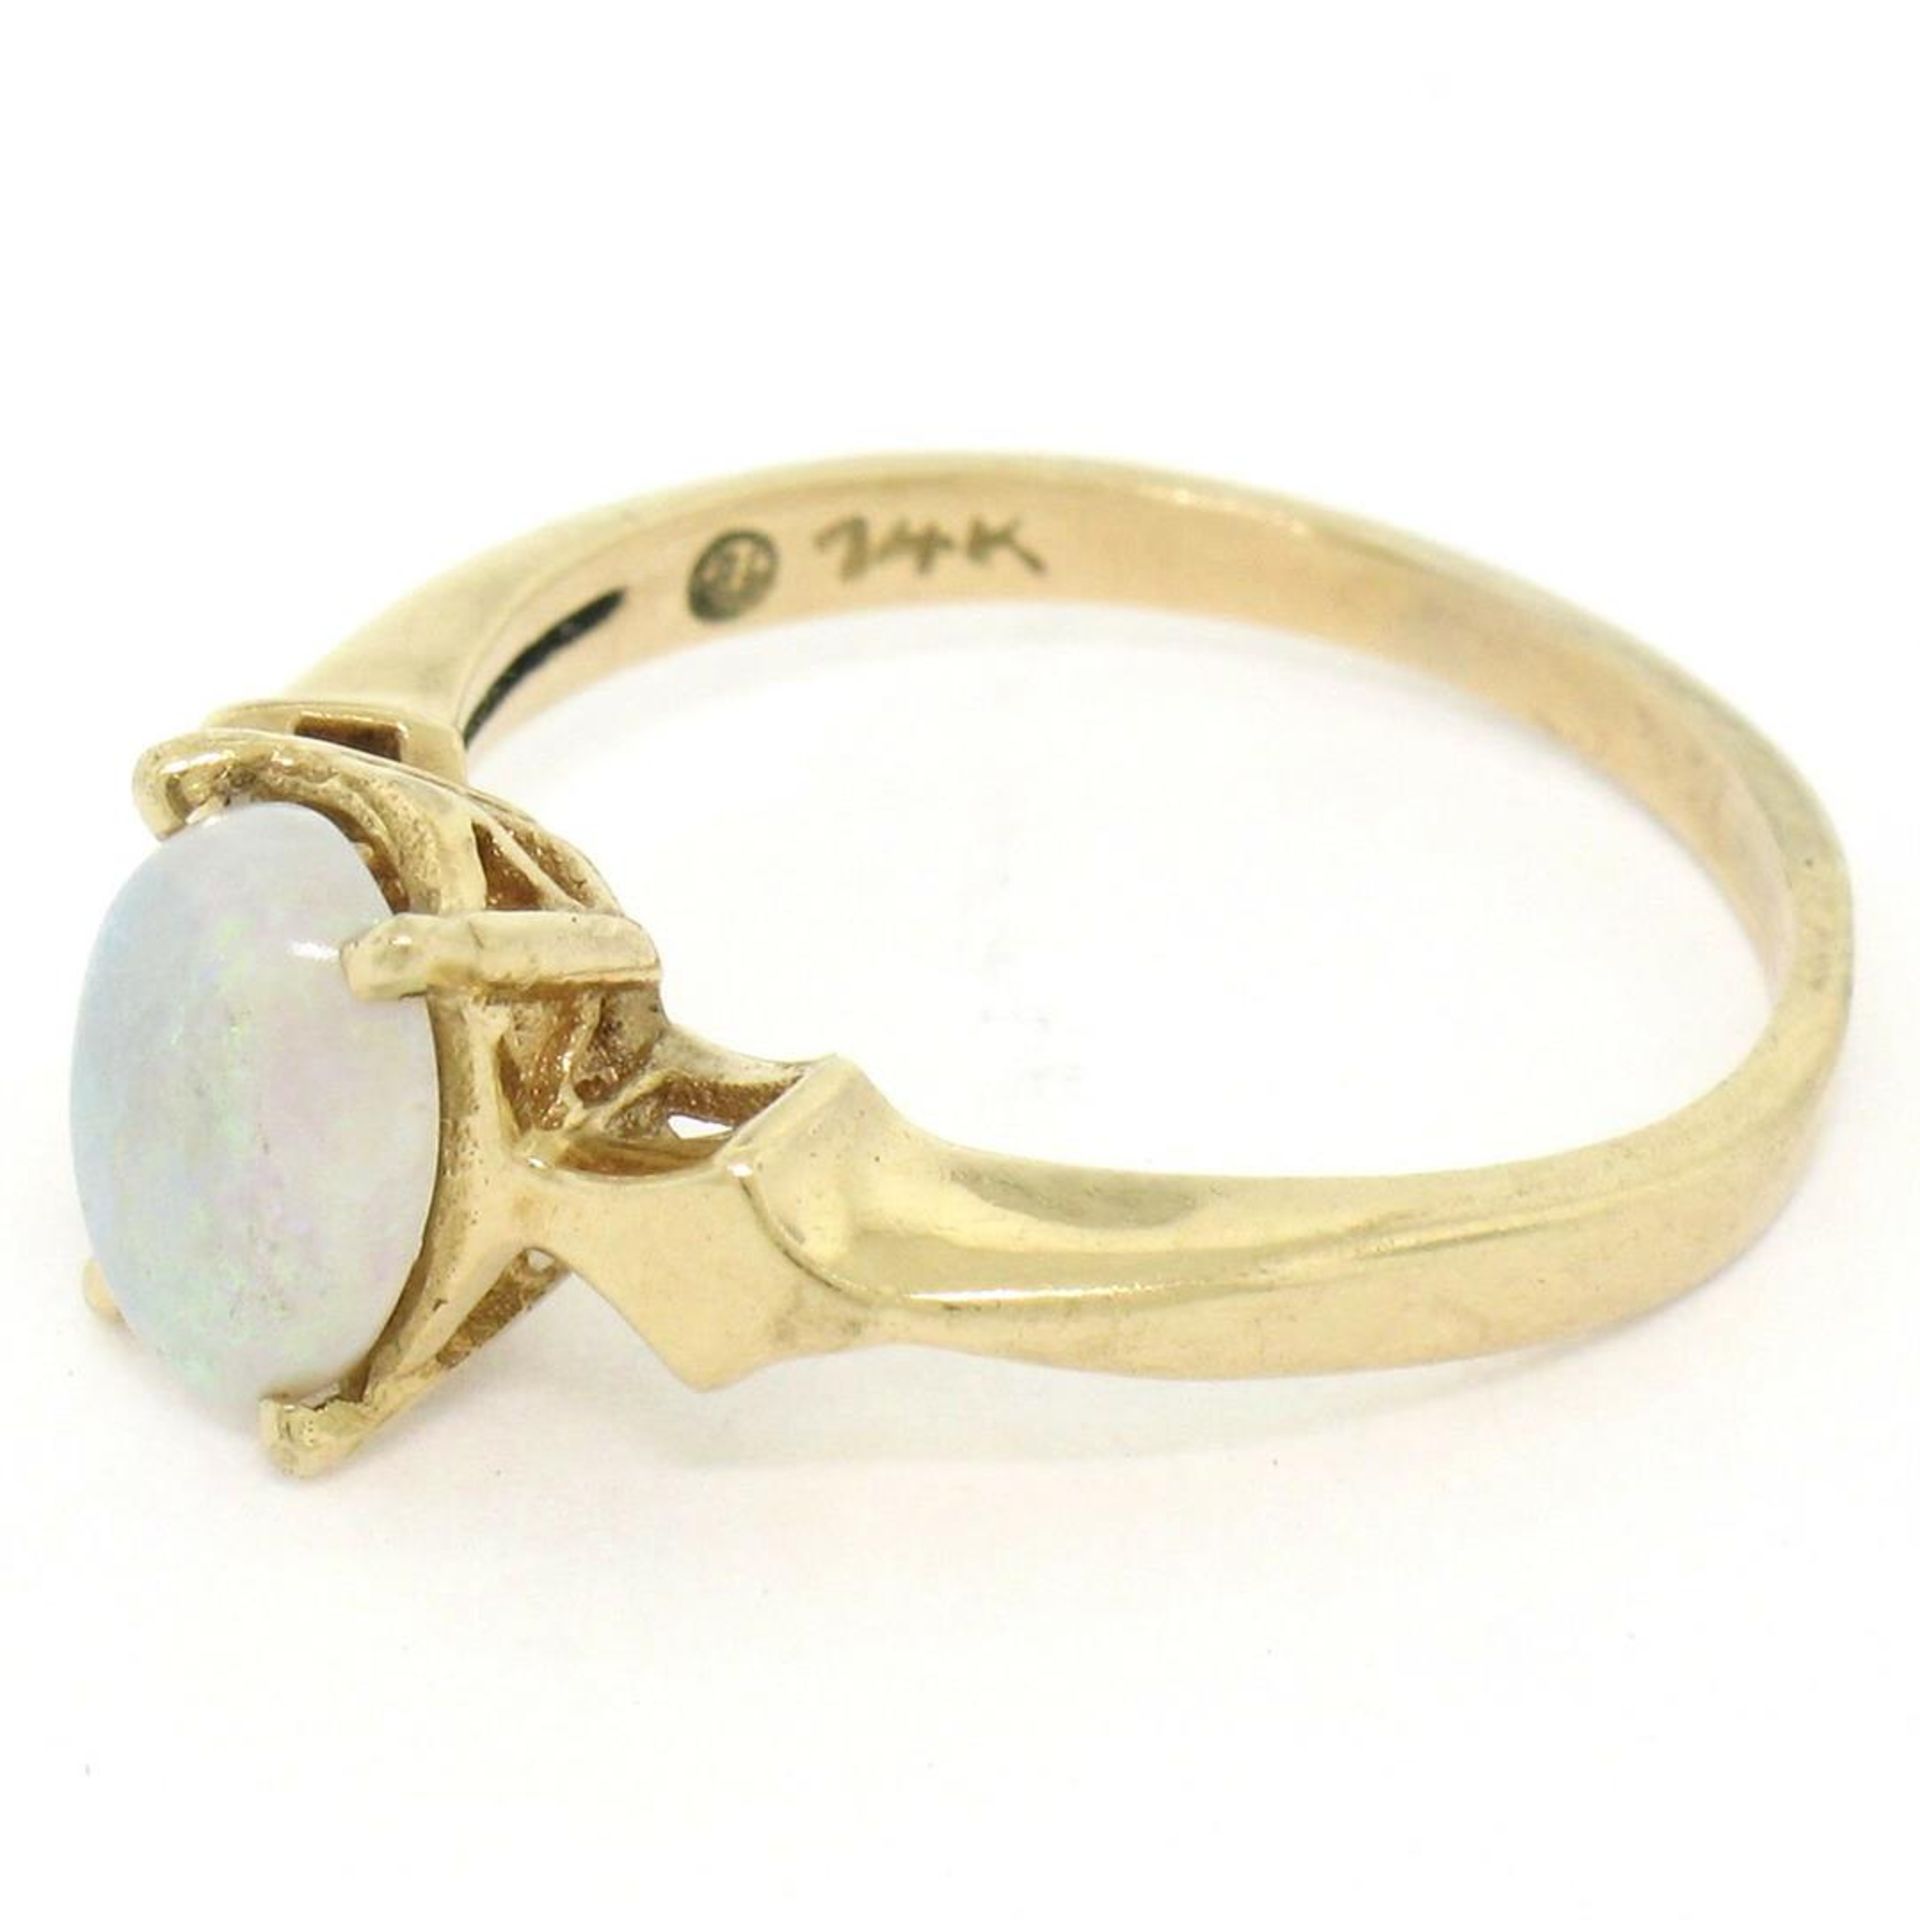 Vintage 14K Yellow Gold 0.65ct Petite Oval Cabochon Opal Solitaire Ring Size 6 - Image 3 of 9